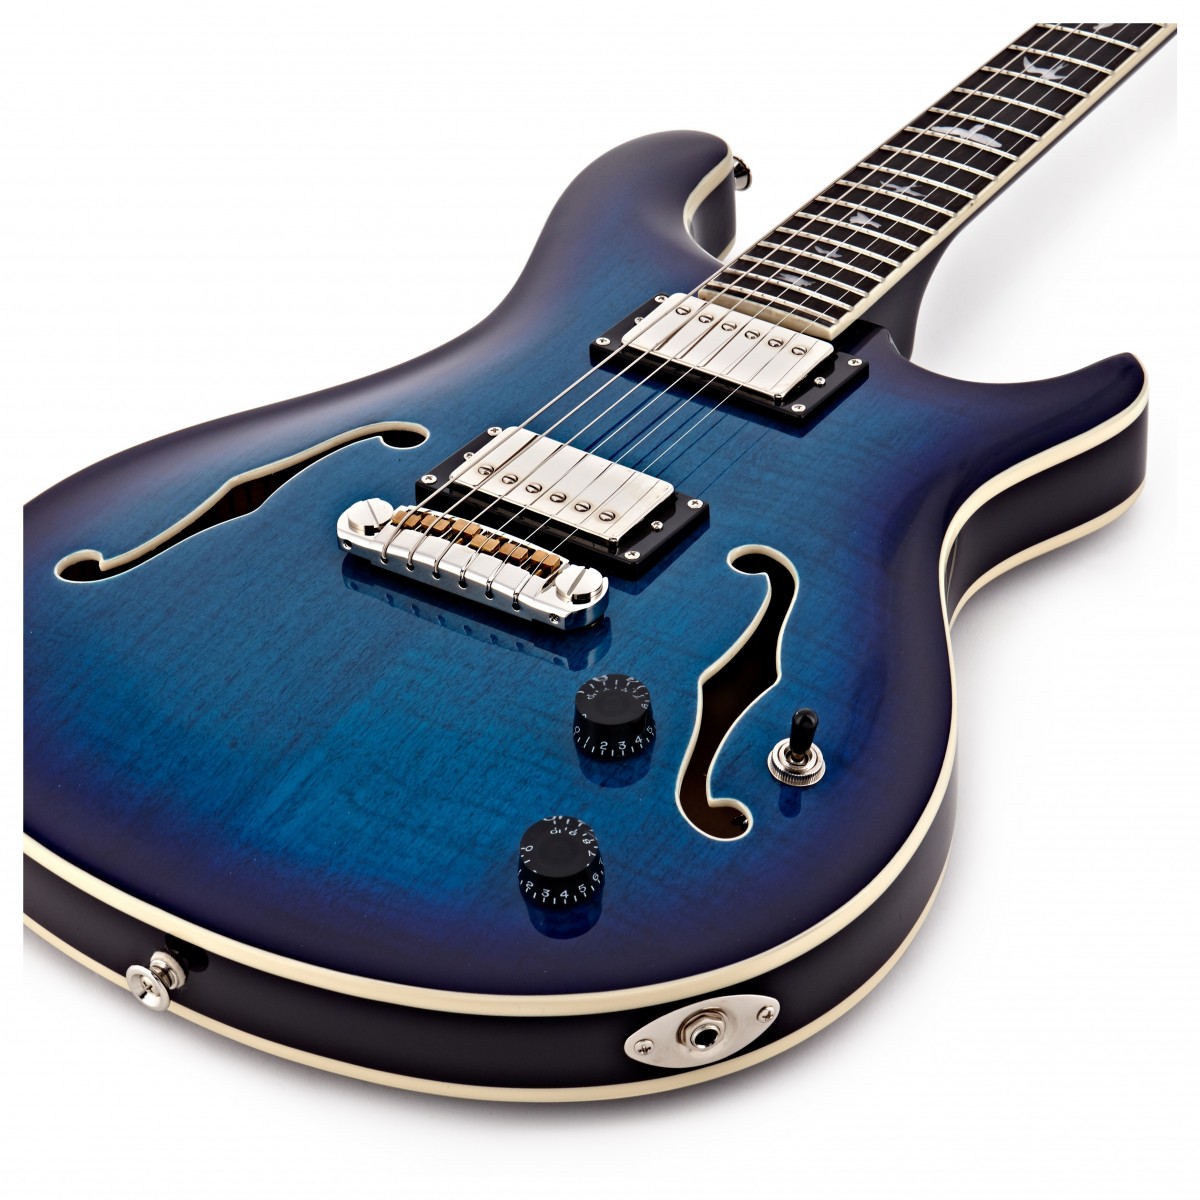 Prs Se Hollow Body Ii Hh Ht Eb - Faded Blue Burst - Semi-hollow electric guitar - Variation 3